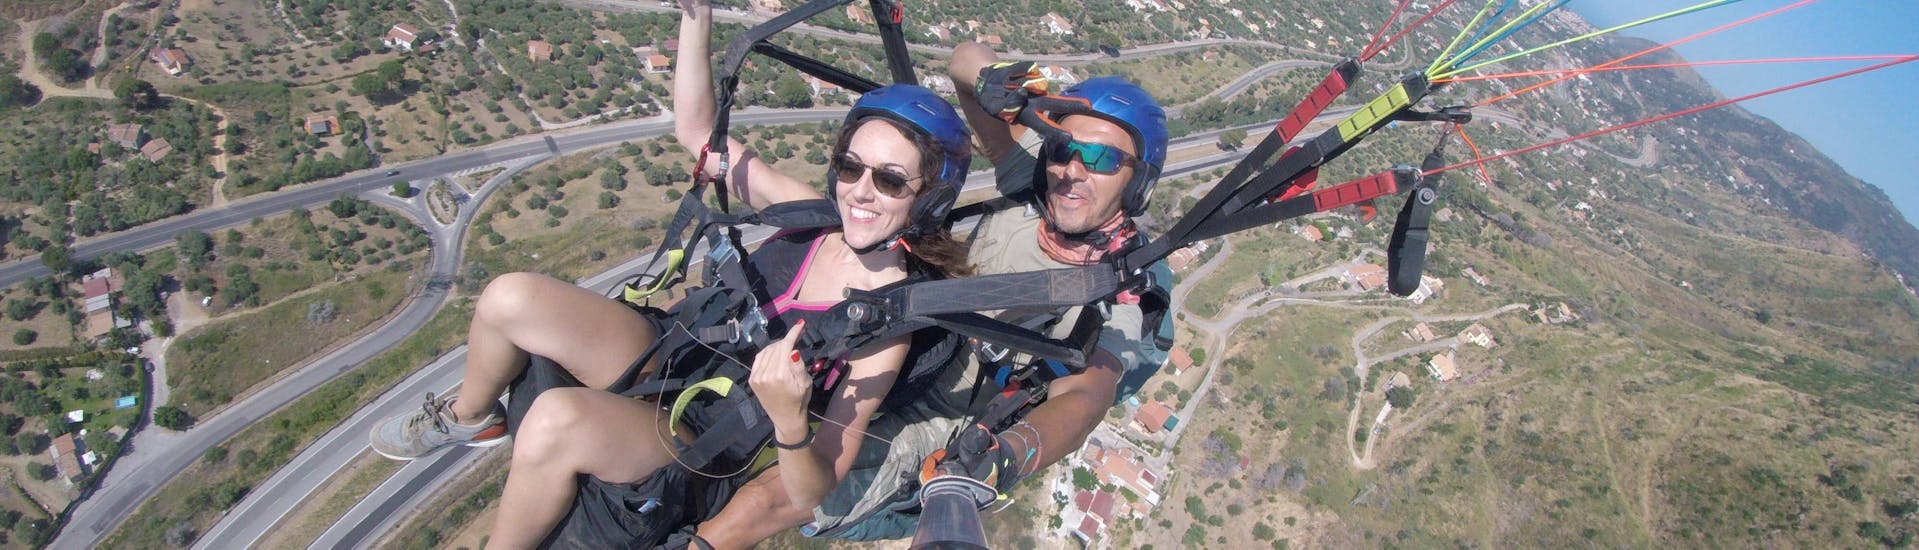 Tandem Paragliding in Cefalù - Classic with Sicily Paragliding - Hero image